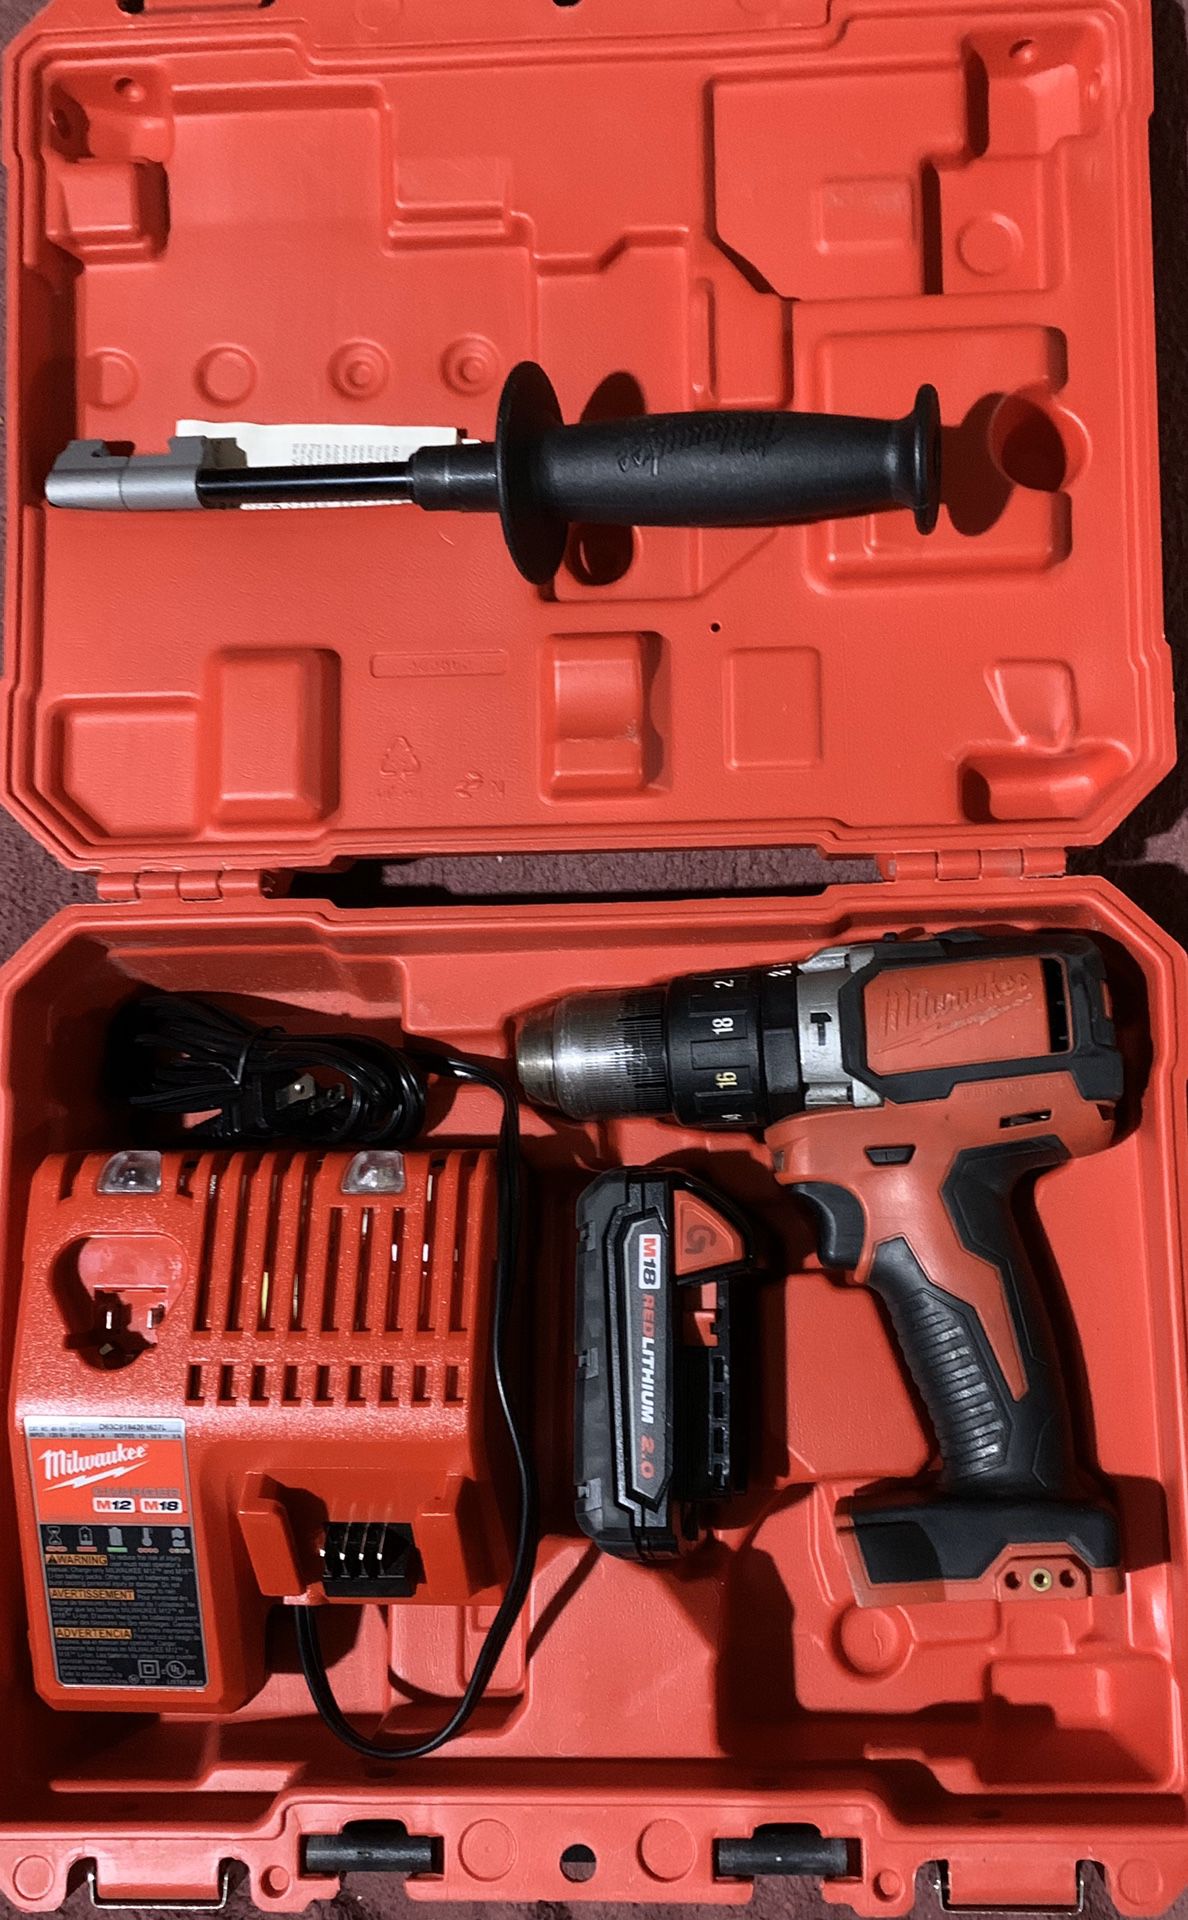 Milwaukee 18V Lithium-Ion Cordless Hammer Driver-Drill,-Drill Batter, fastening and hammer Drilling applications with charger Pick Up Only / No Trade/